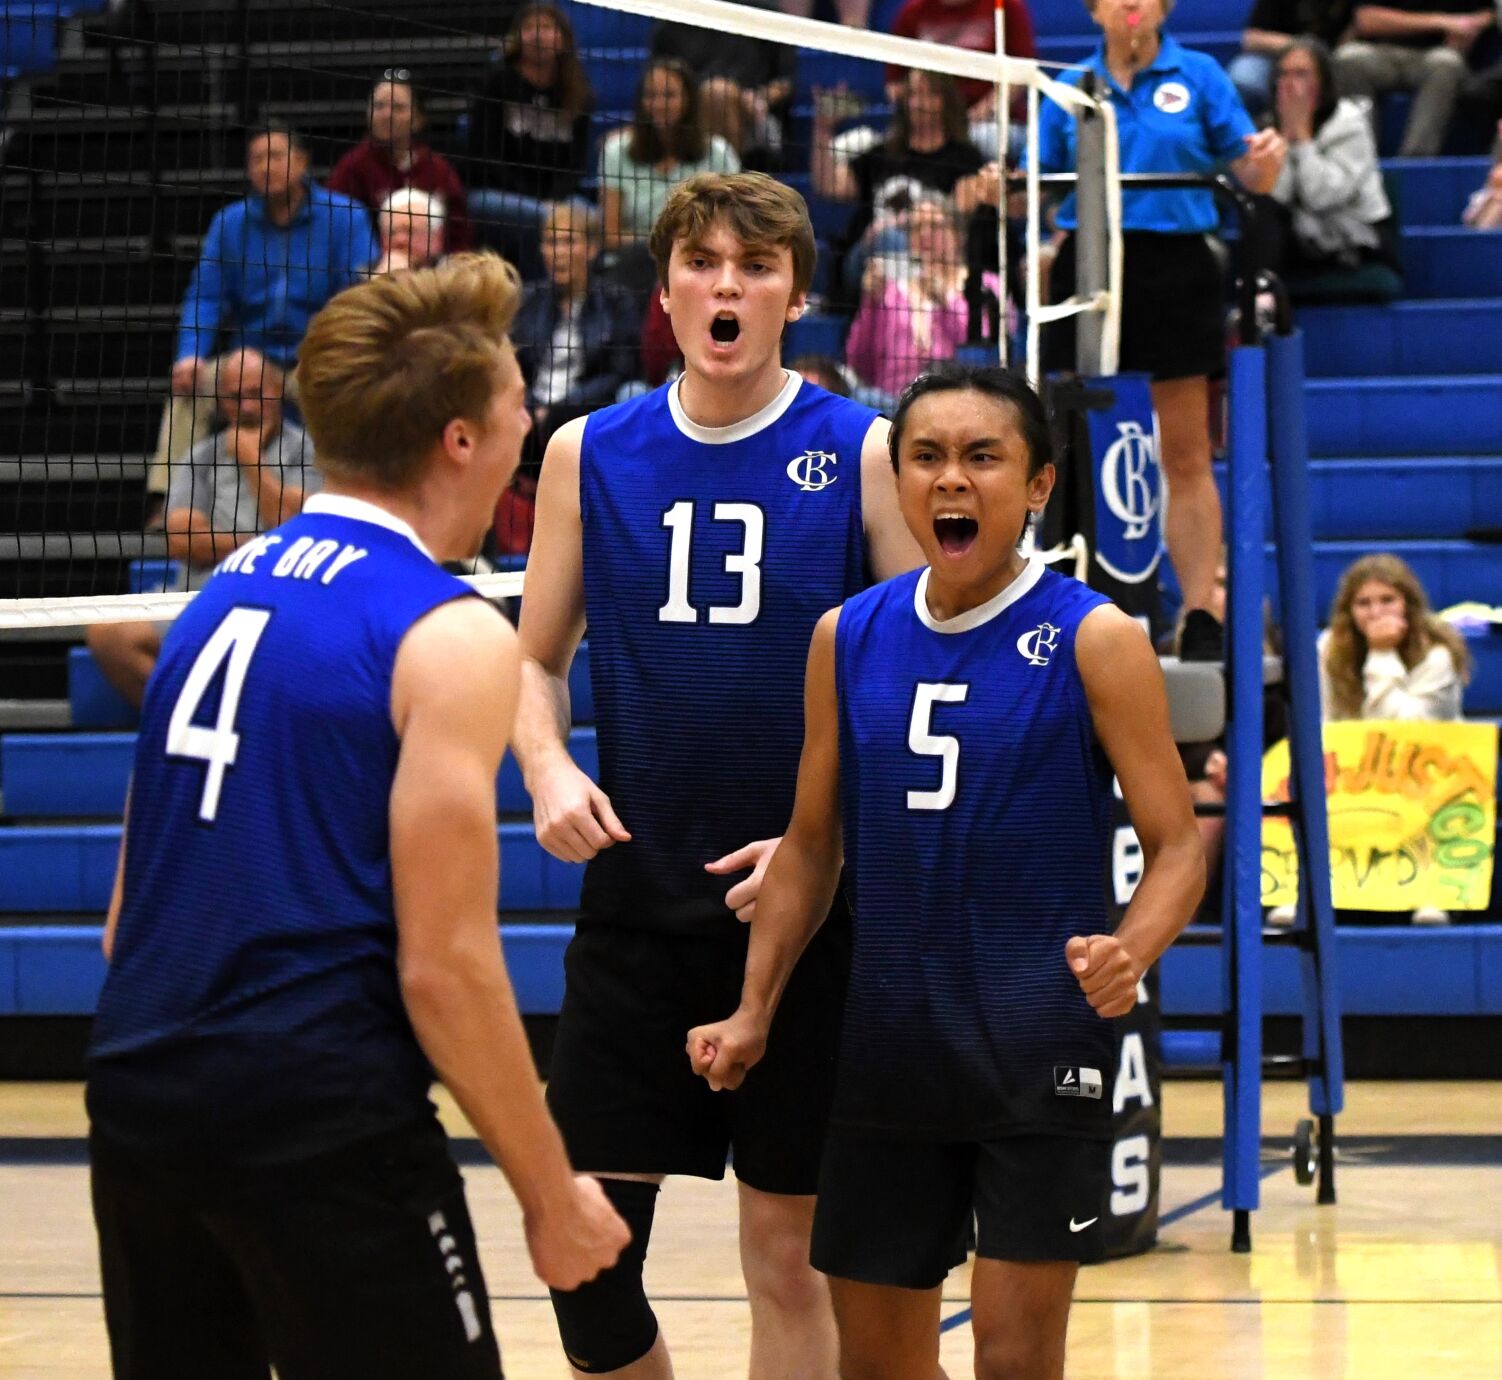 BOYS VOLLEYBALL PLAYER OF THE YEAR: Tran set up Cobras for success